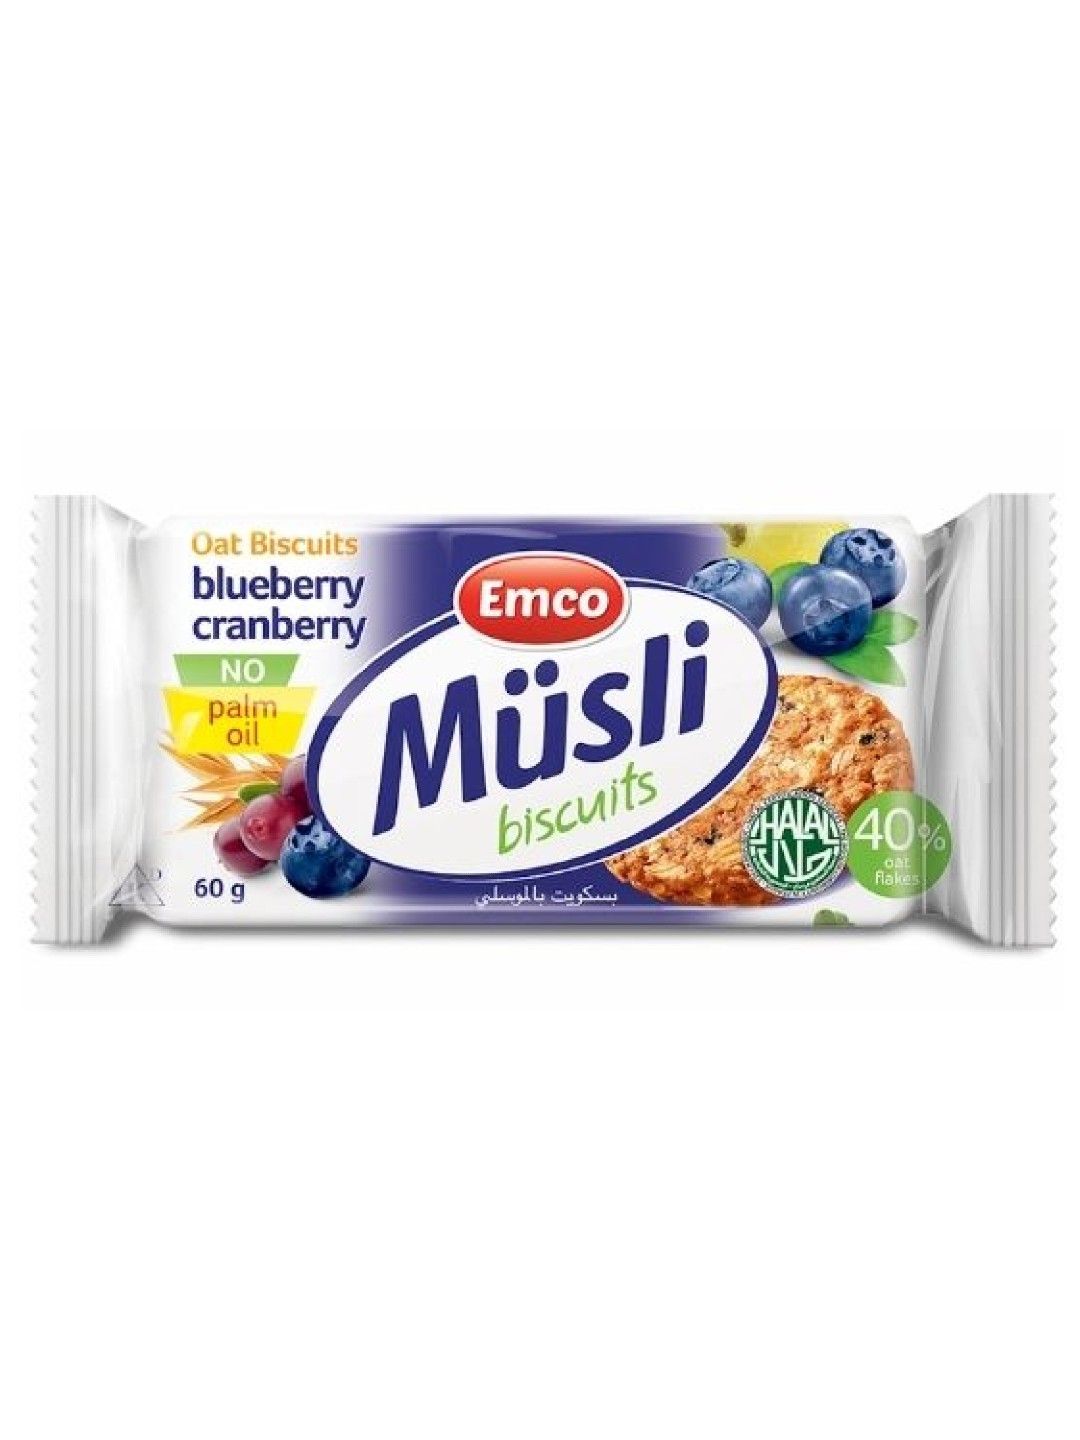 Emco Musli Oat Biscuits Bundle of 6 (60g) (Blueberry Cranberry- Image 2)